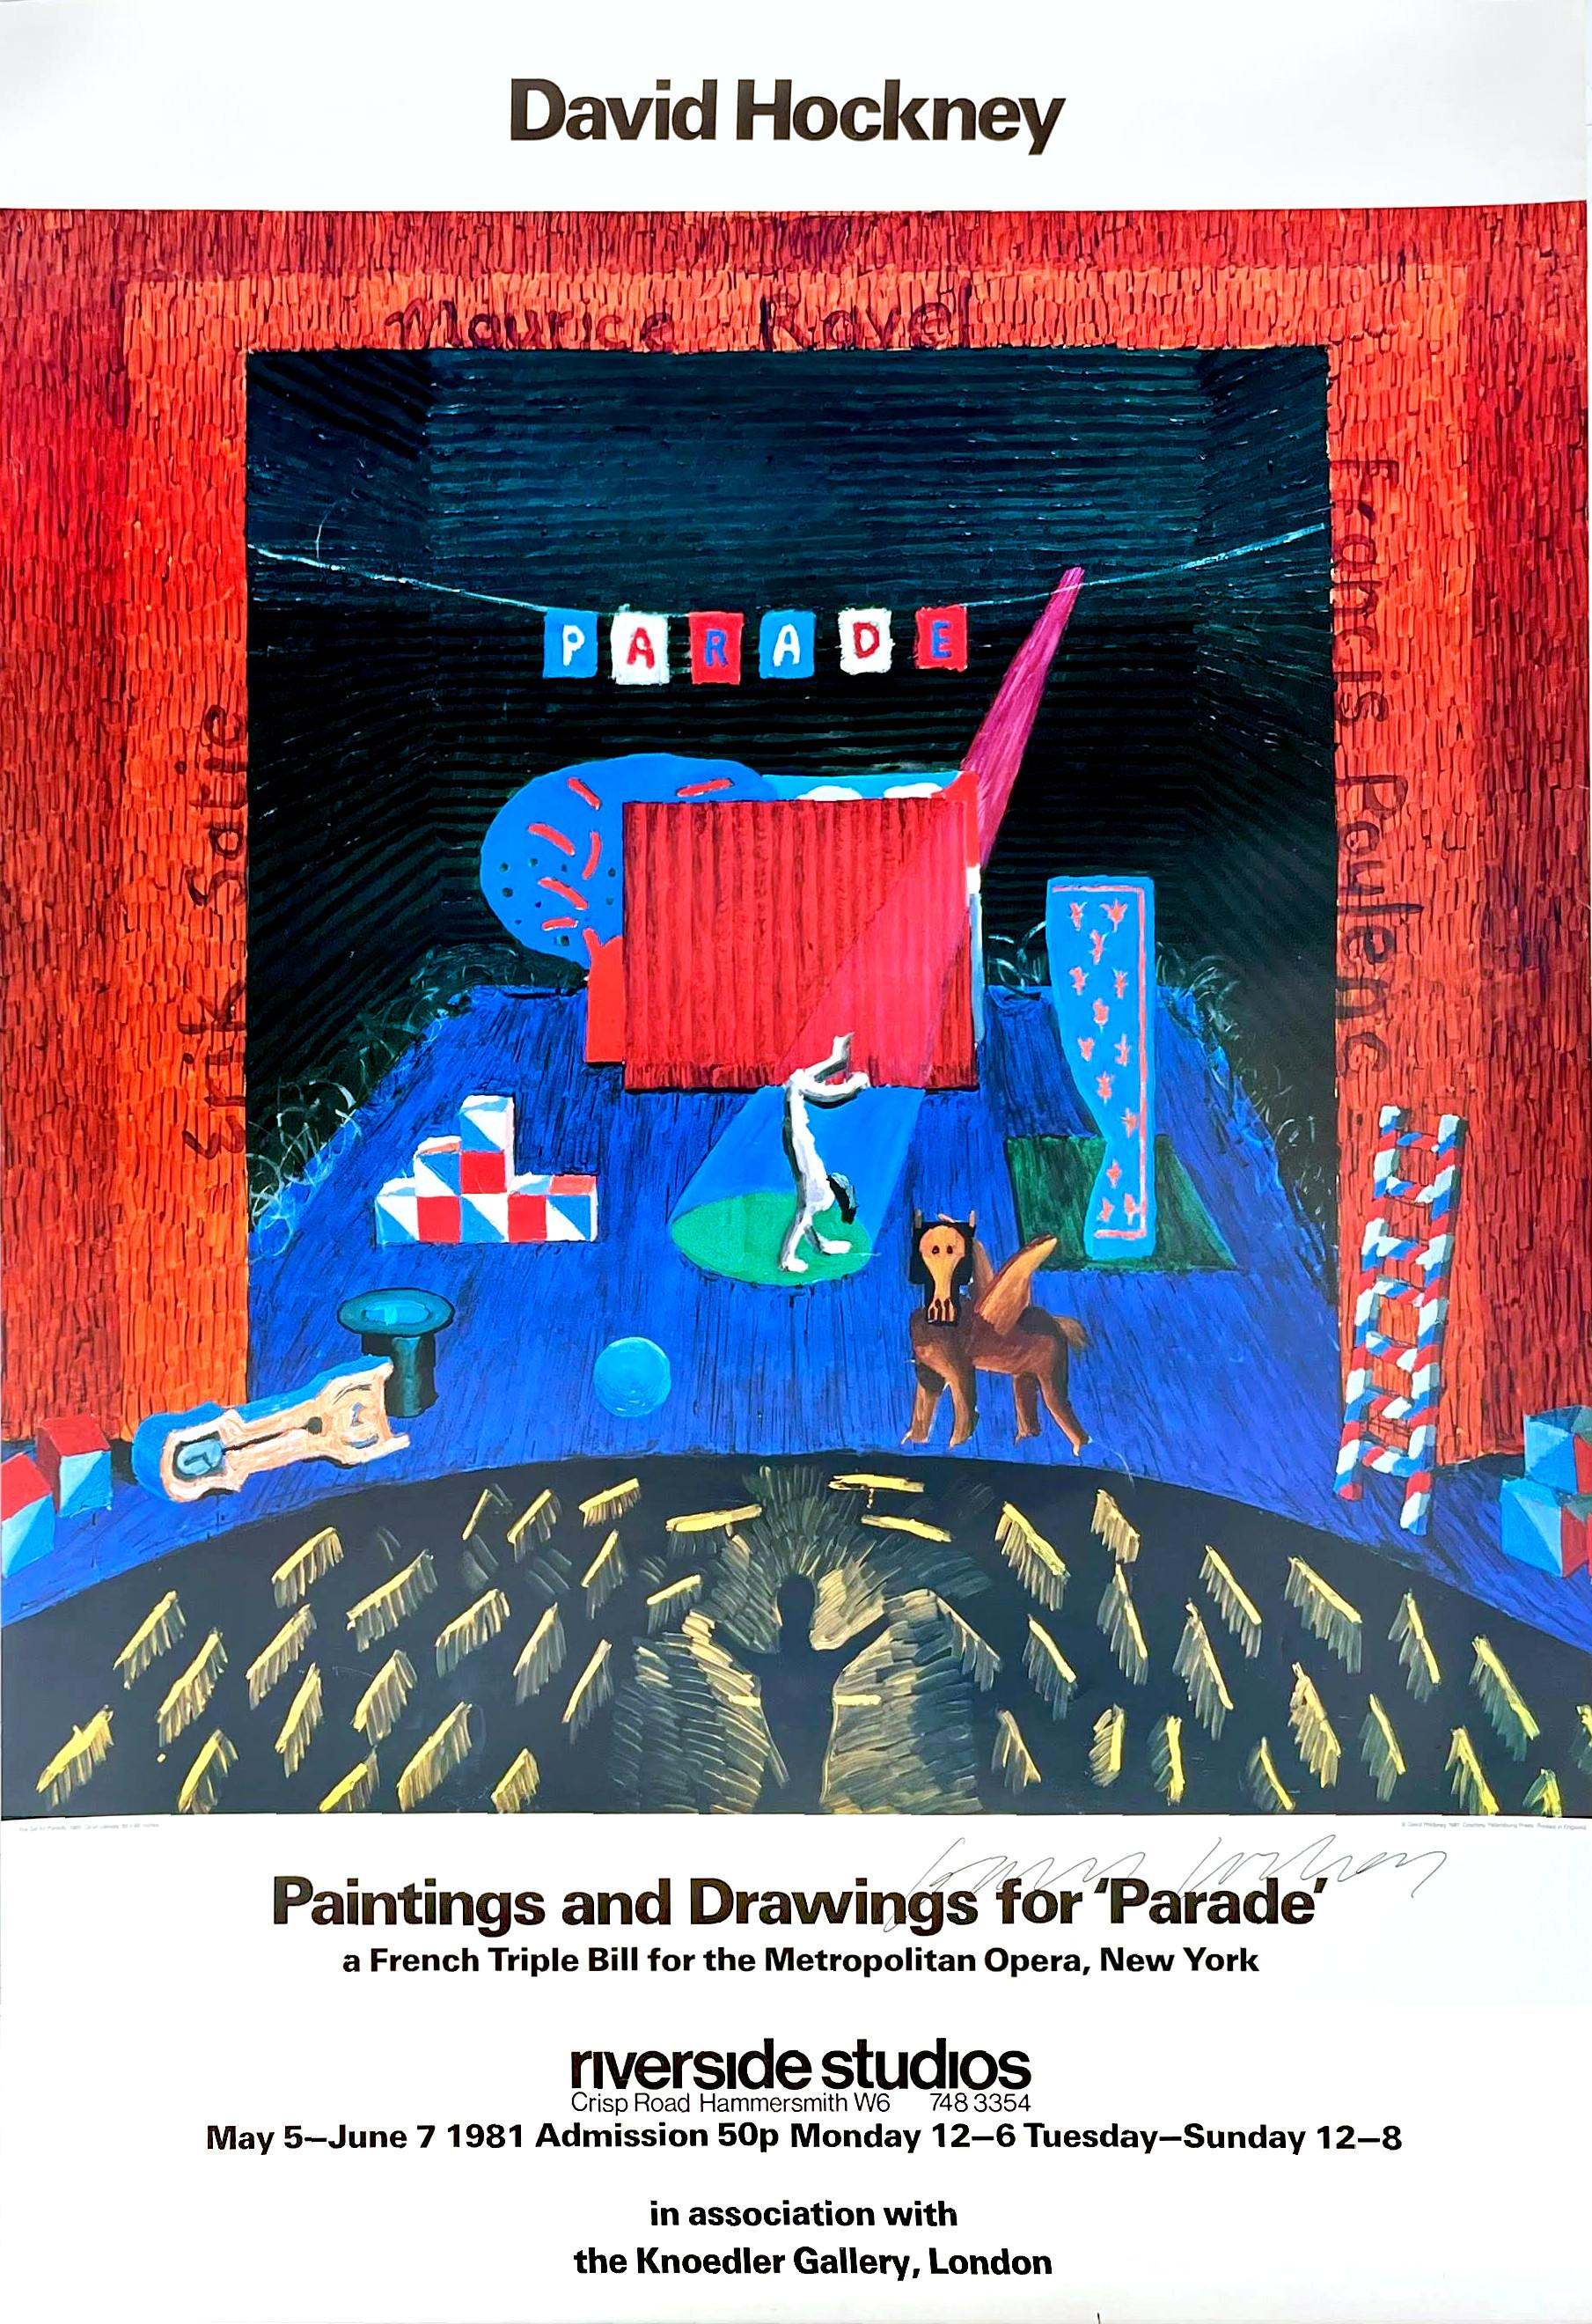 David Hockney
Paintings and Drawings for Parade - Metropolitan Museum (Hand Signed by David Hockney), 1981
Offset Lithograph. Hand signed by David Hockney
39 × 27 inches
Hand-signed by artist, Hand signed boldly in black ink by David Hockney on the